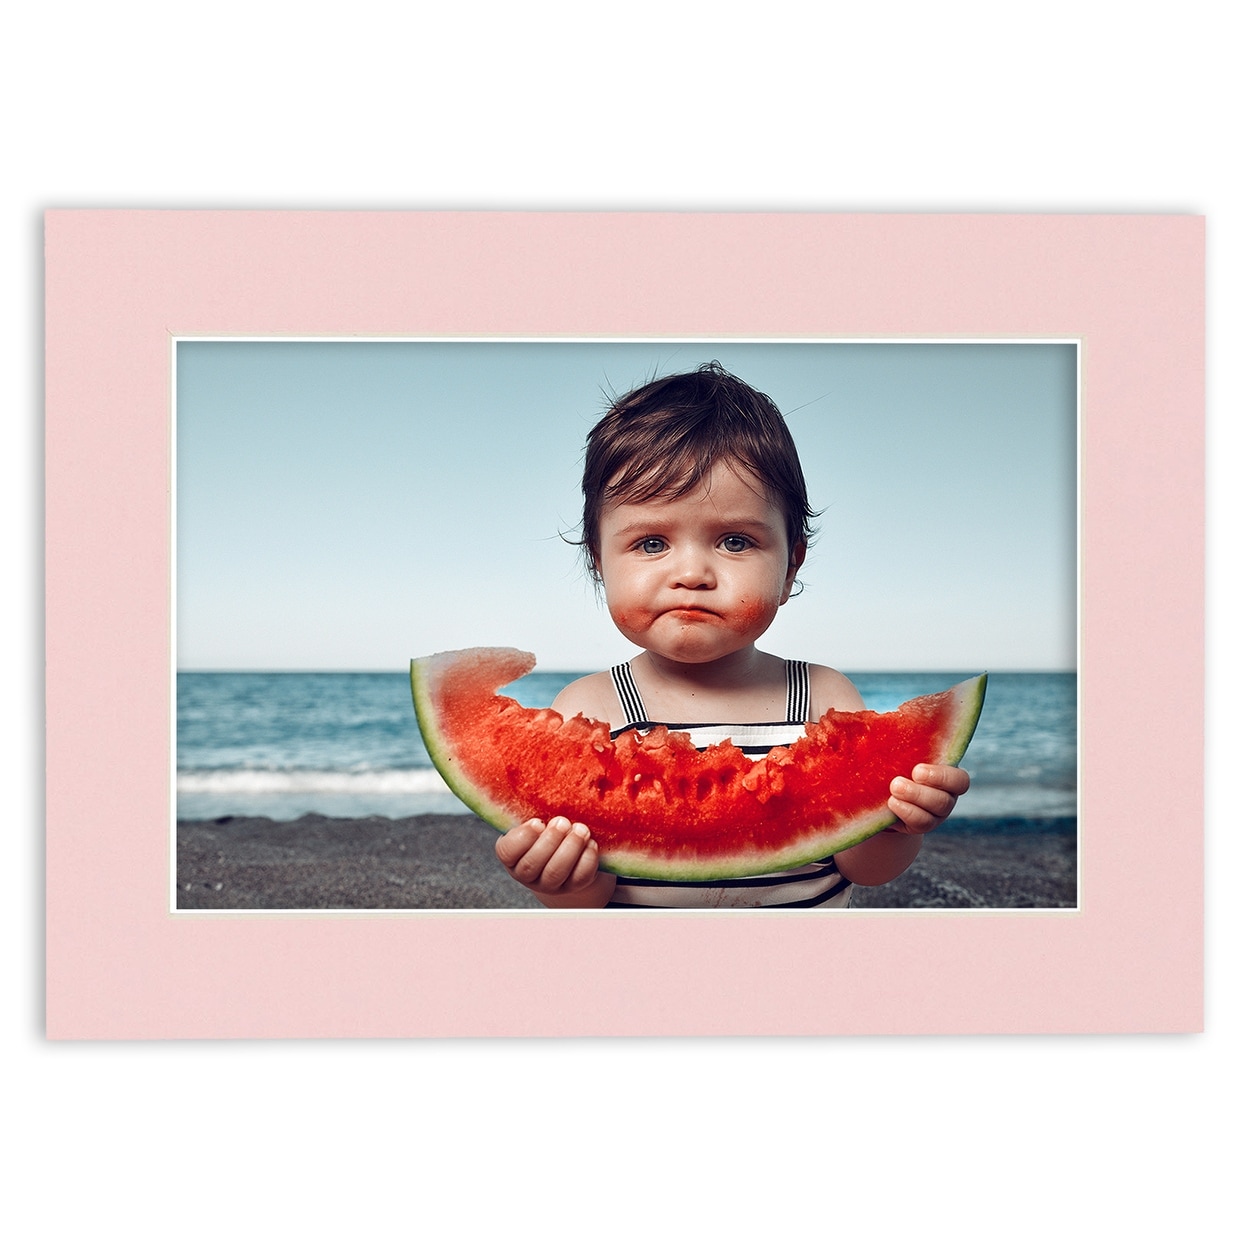 5x7 Mat for 8x10 Frame - Precut Mat Board Acid-Free Bright Green 5x7 Photo Matte Made to Fit A 8x10 Picture Frame